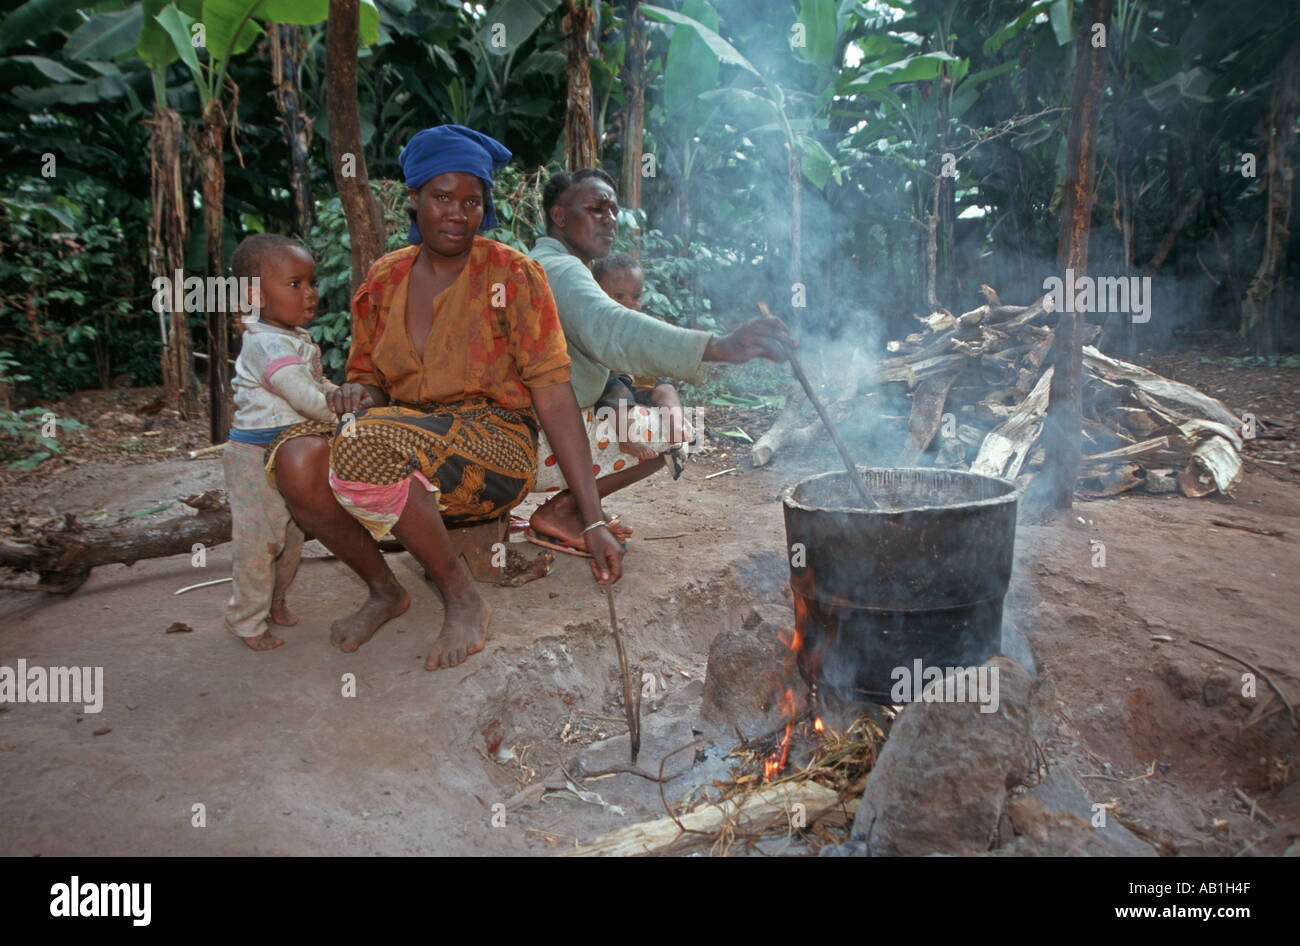 Women of the Chagga tribe with children cooking on the traditional three stone open fire, Kilimanjaro region, Tanzania Stock Photo